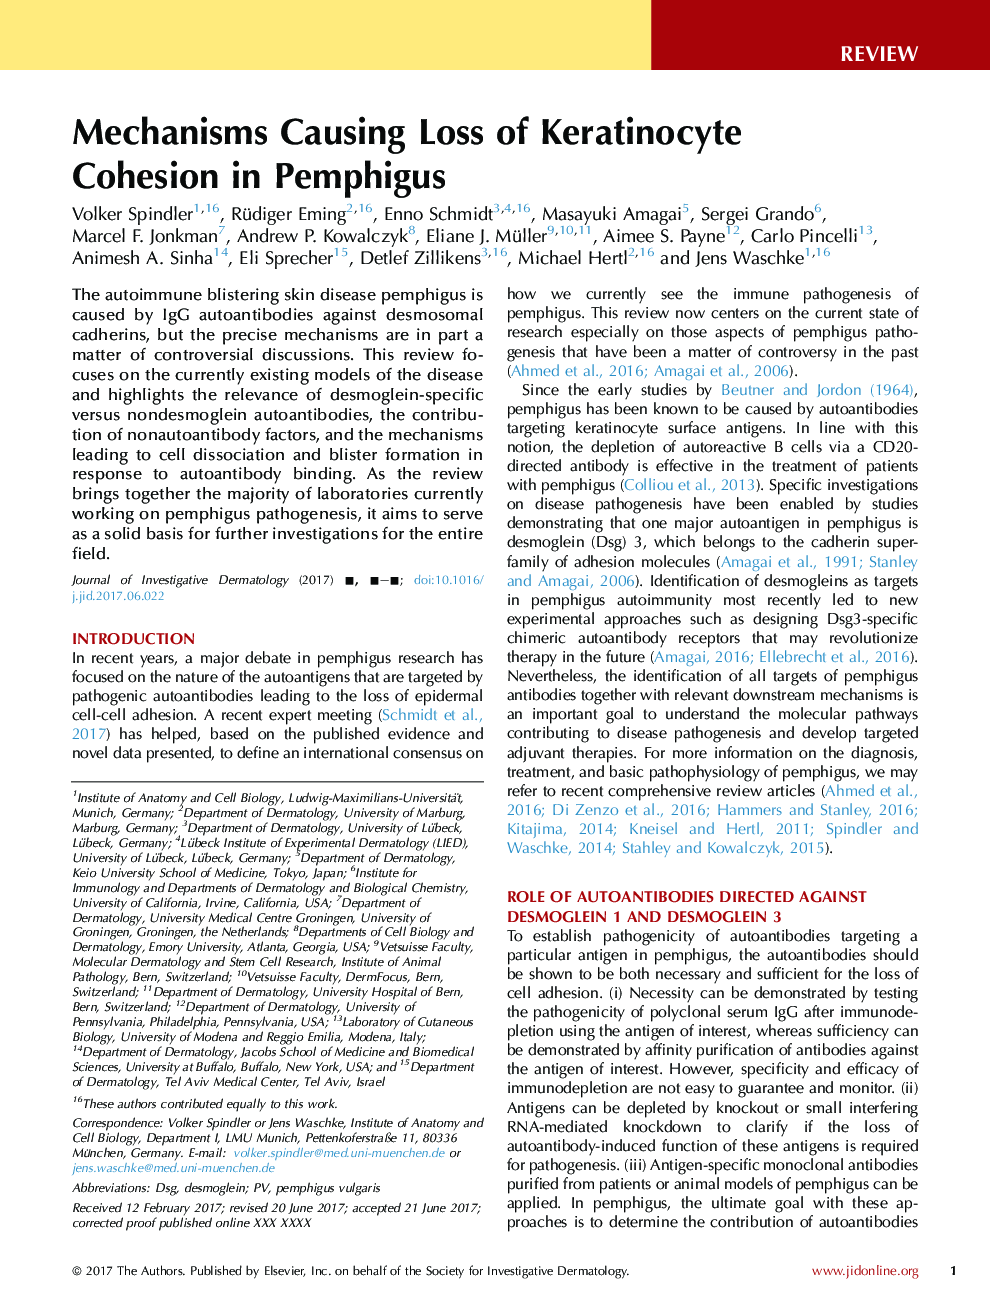 Mechanisms Causing Loss of Keratinocyte Cohesion in Pemphigus